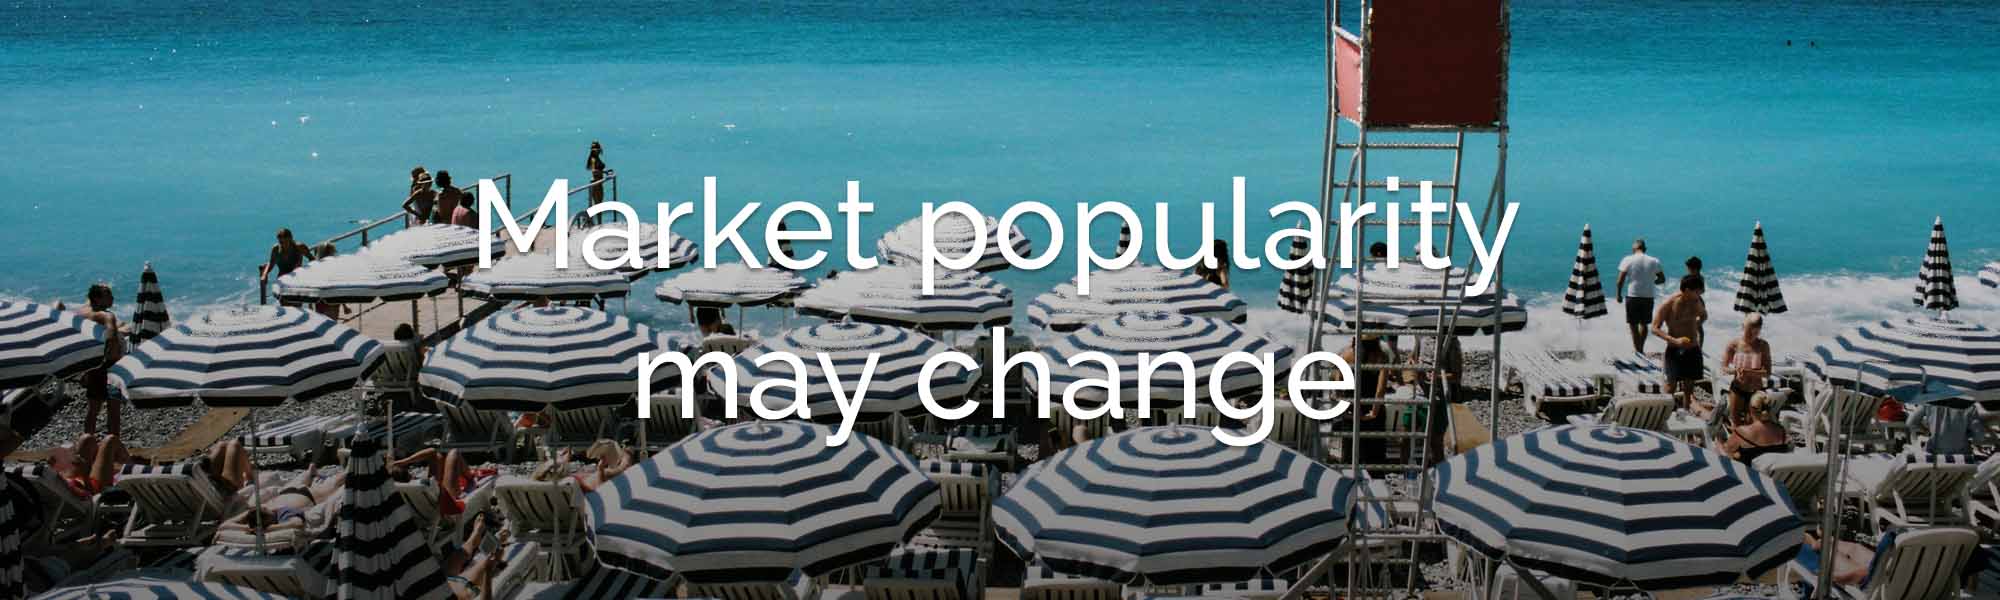 travel trends definition